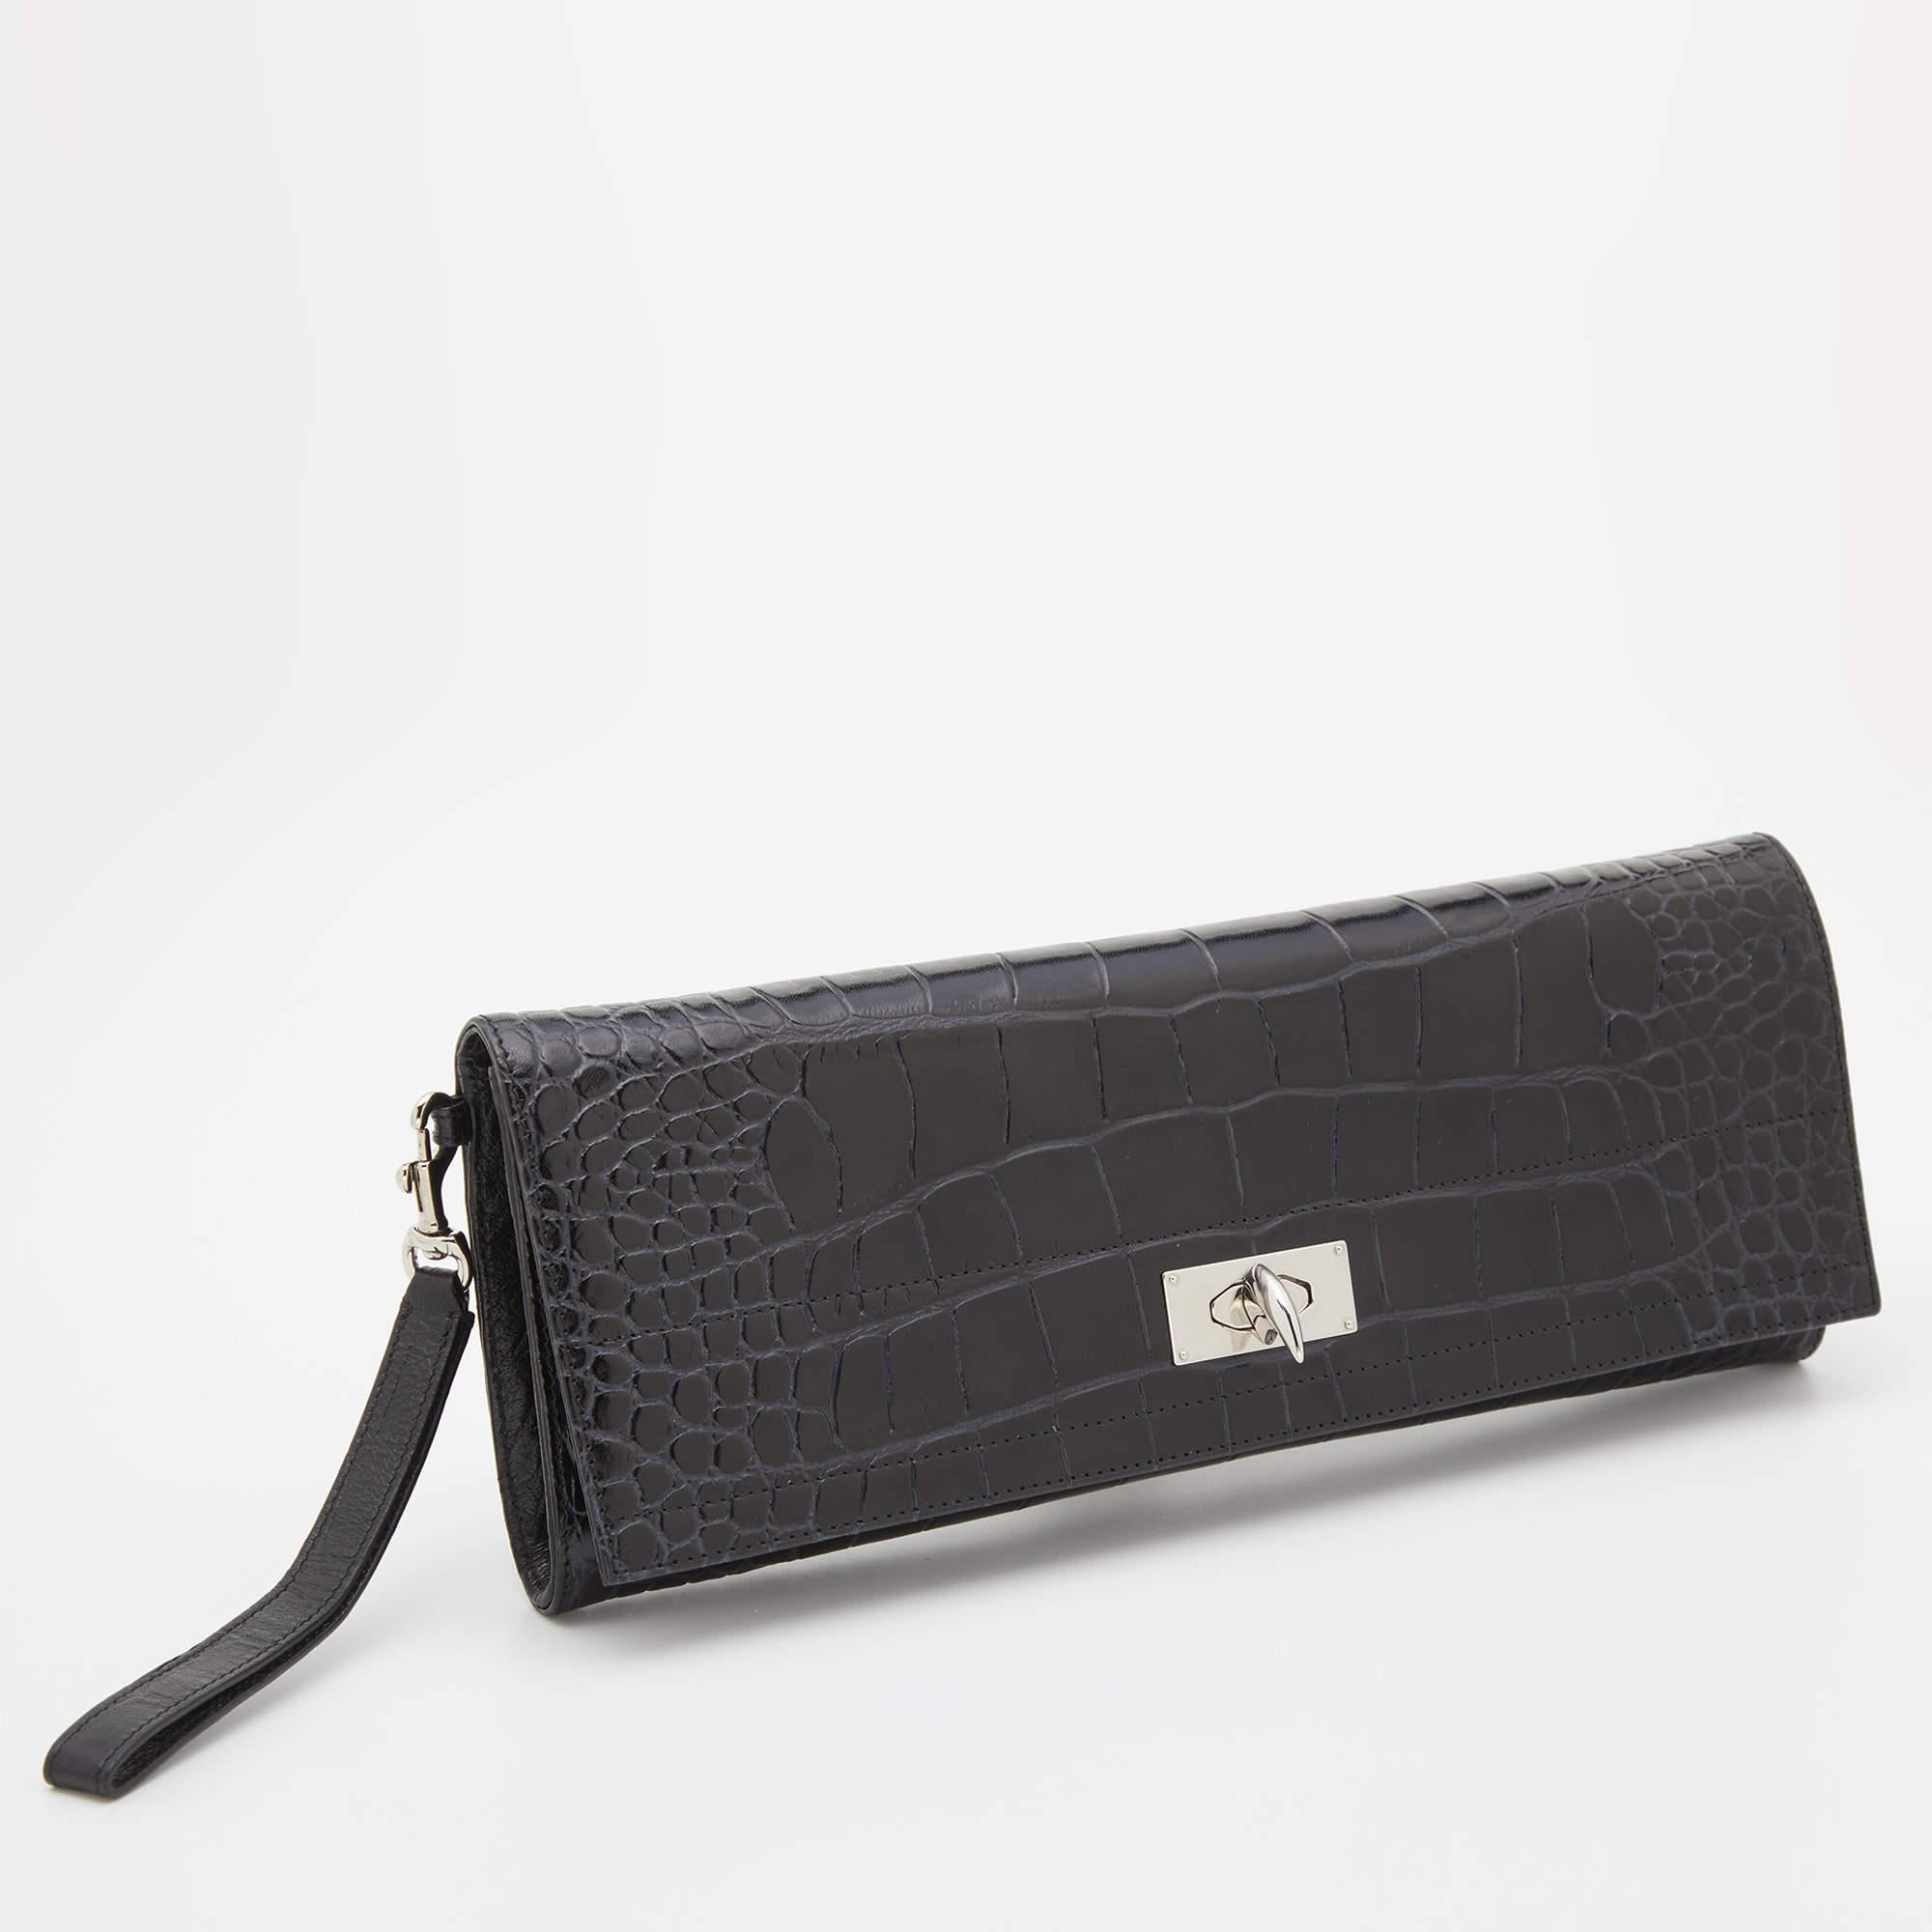 Women's Givenchy Black Croc Embossed Leather Shark Tooth Long Wristlet Clutch